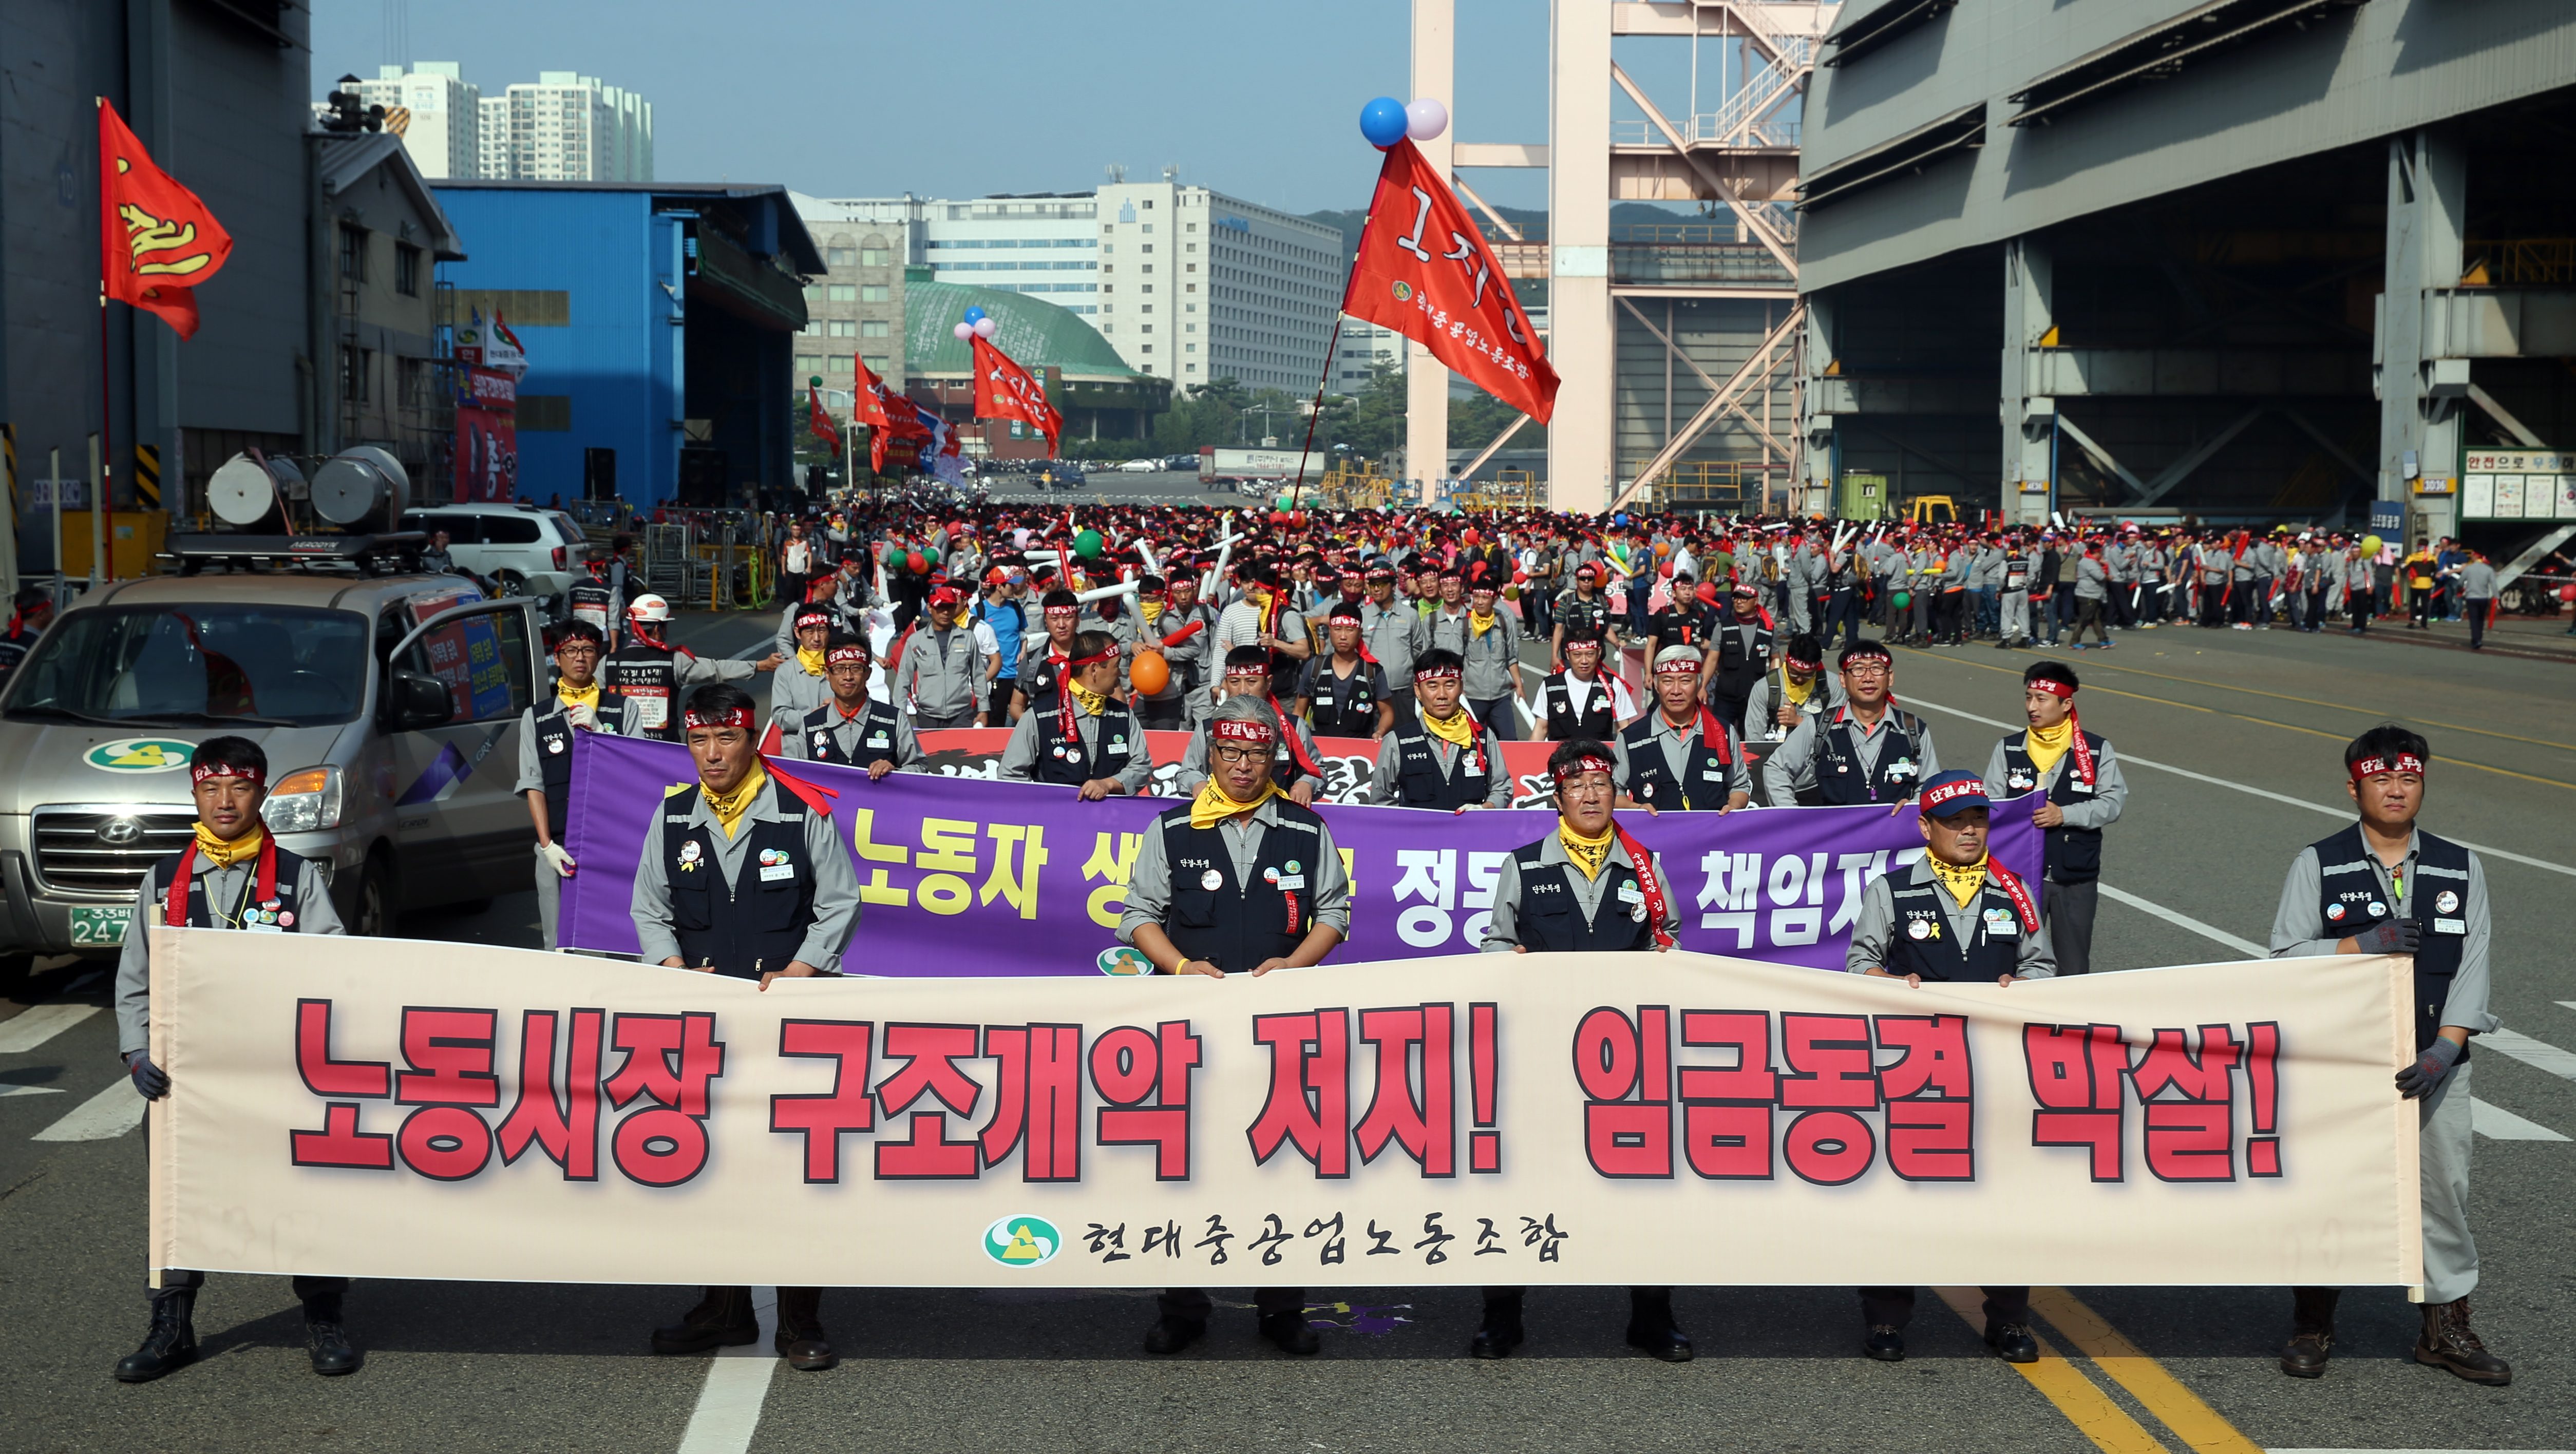 ON STRIKE. Unionized workers march at the shipyard of Hyundai Heavy Industries in Ulsan, South Korea on September 4, 2015. File photo by Yonhap/EPA 